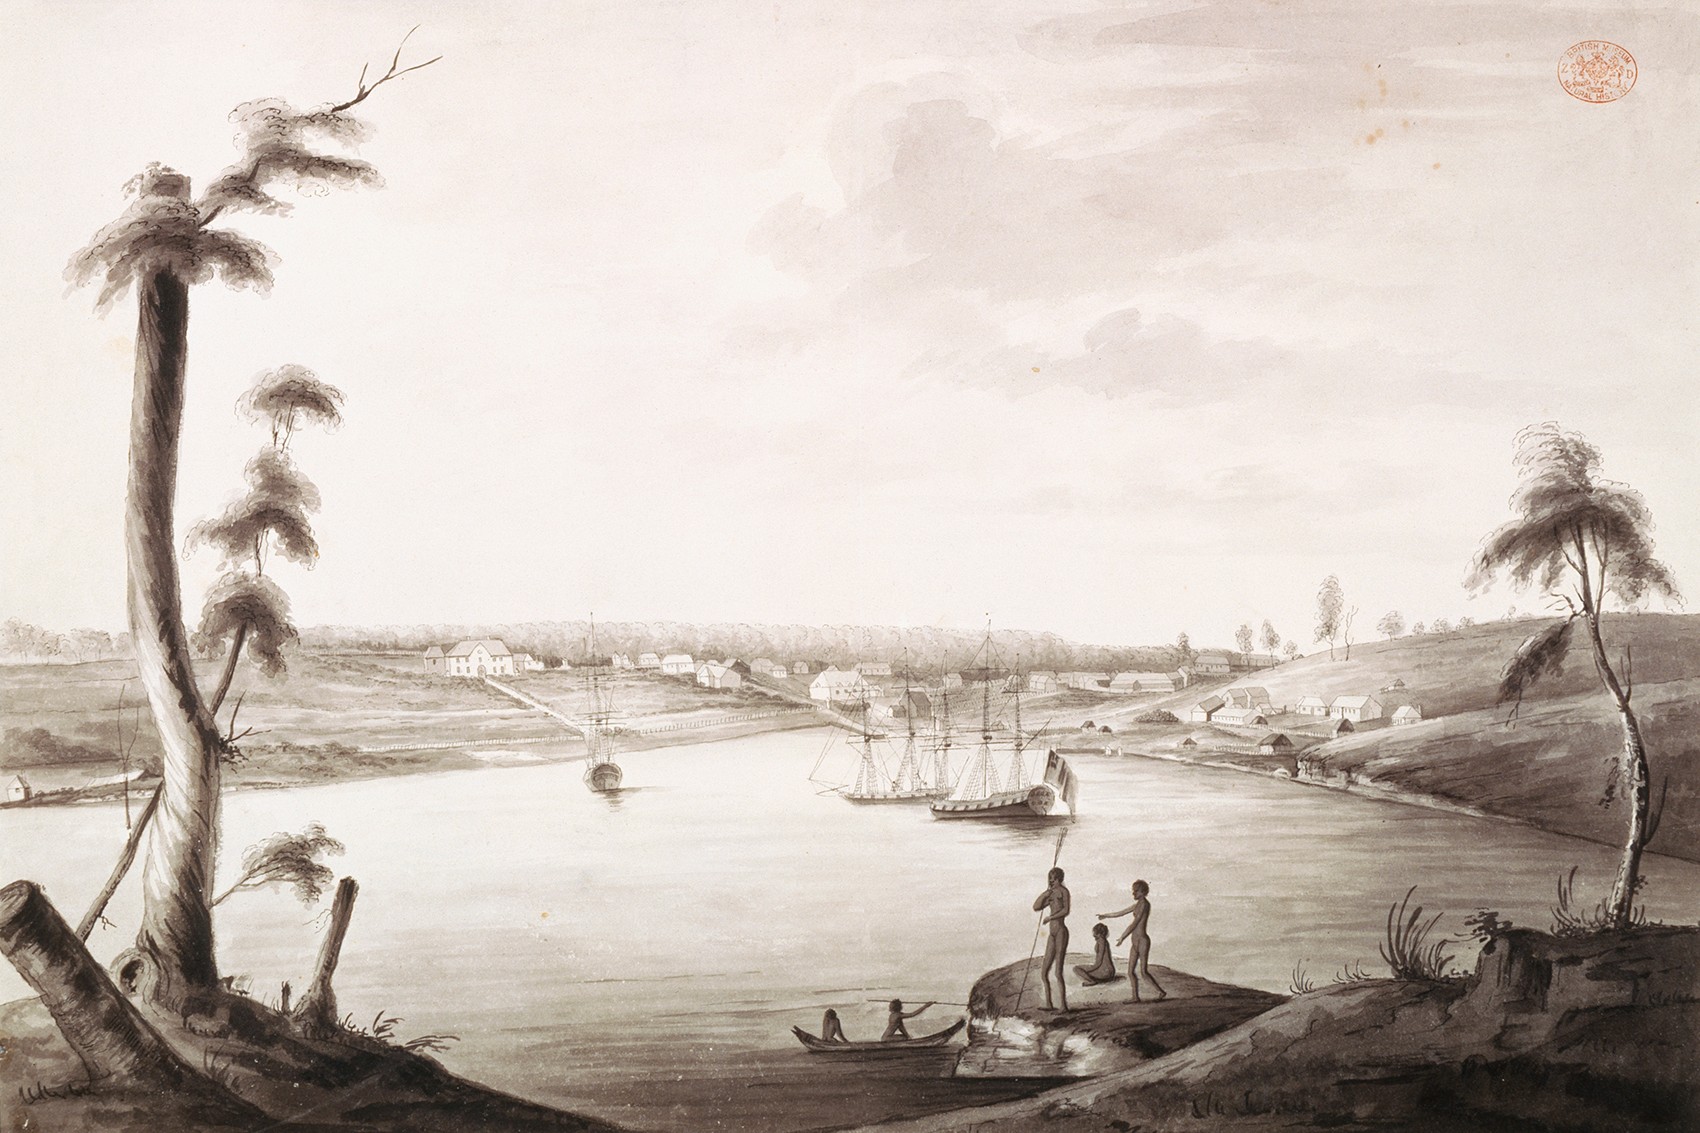 an early picture of Sydney Cove with a group of Aboriginal inhabitants in the foreground 